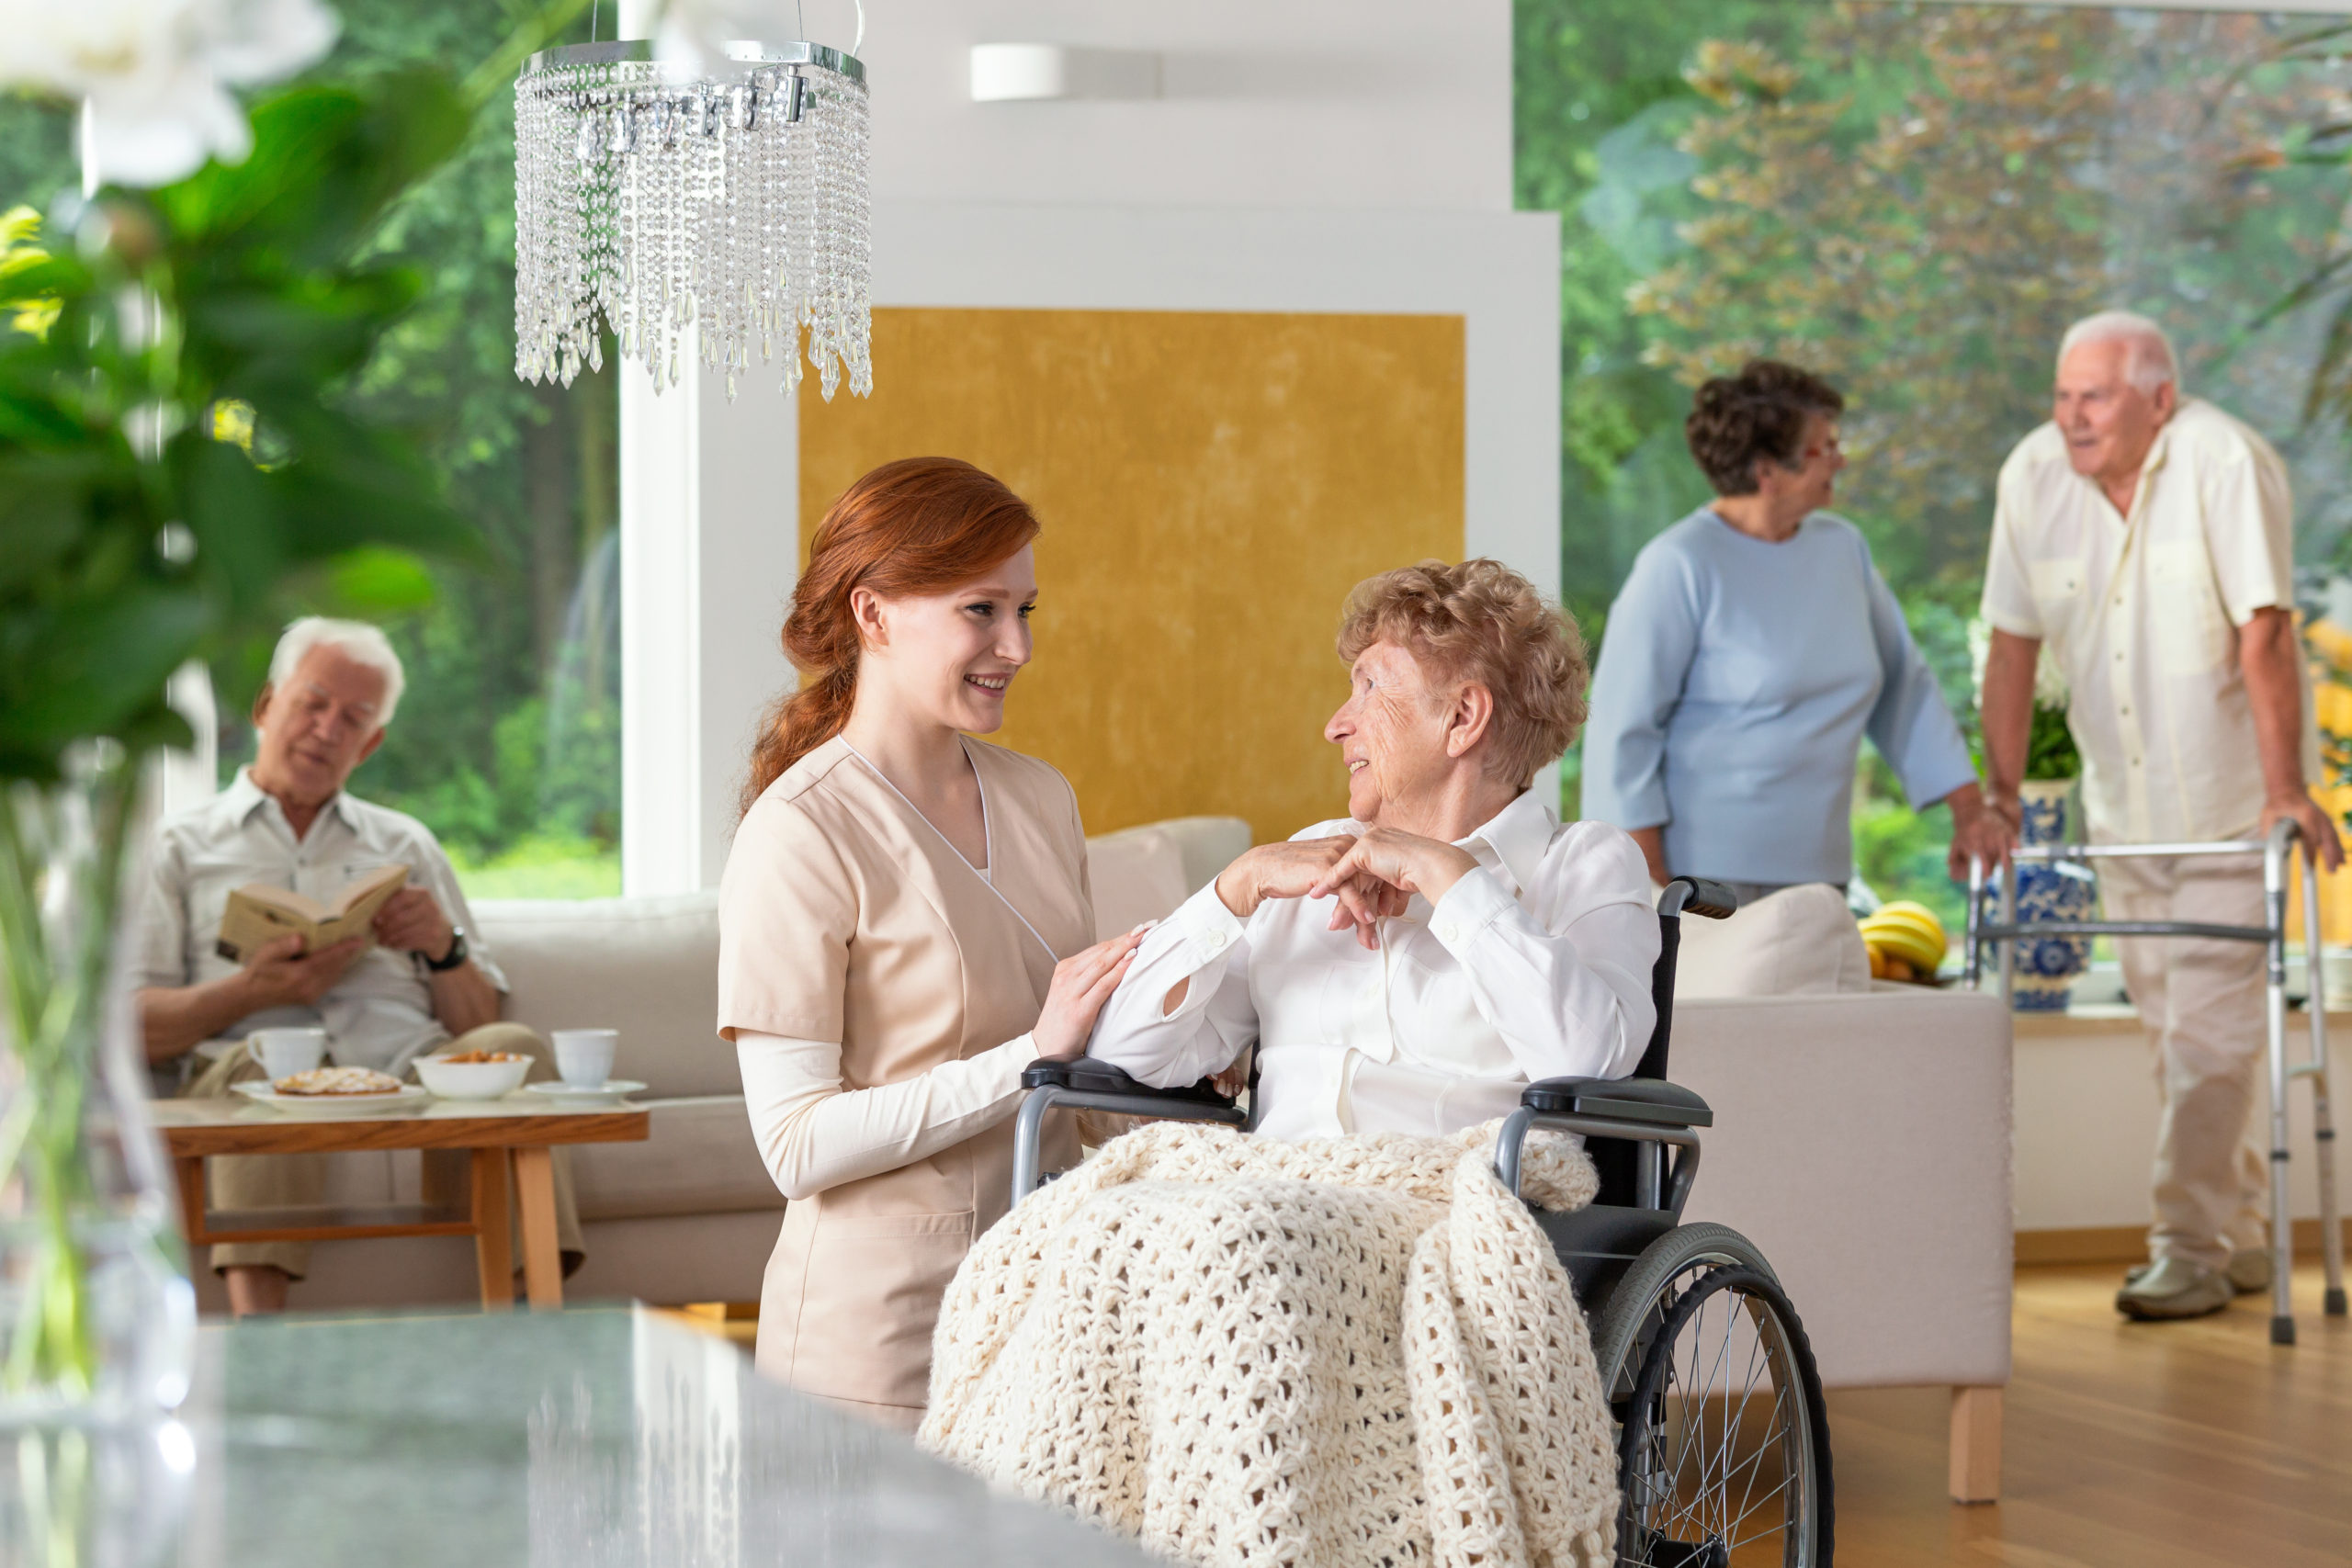 Seniors In A Luxury Living Room Of A Private Retirement Home. Tender Caregiver By An Elderly Lady In A Wheelchair In The Foreground.